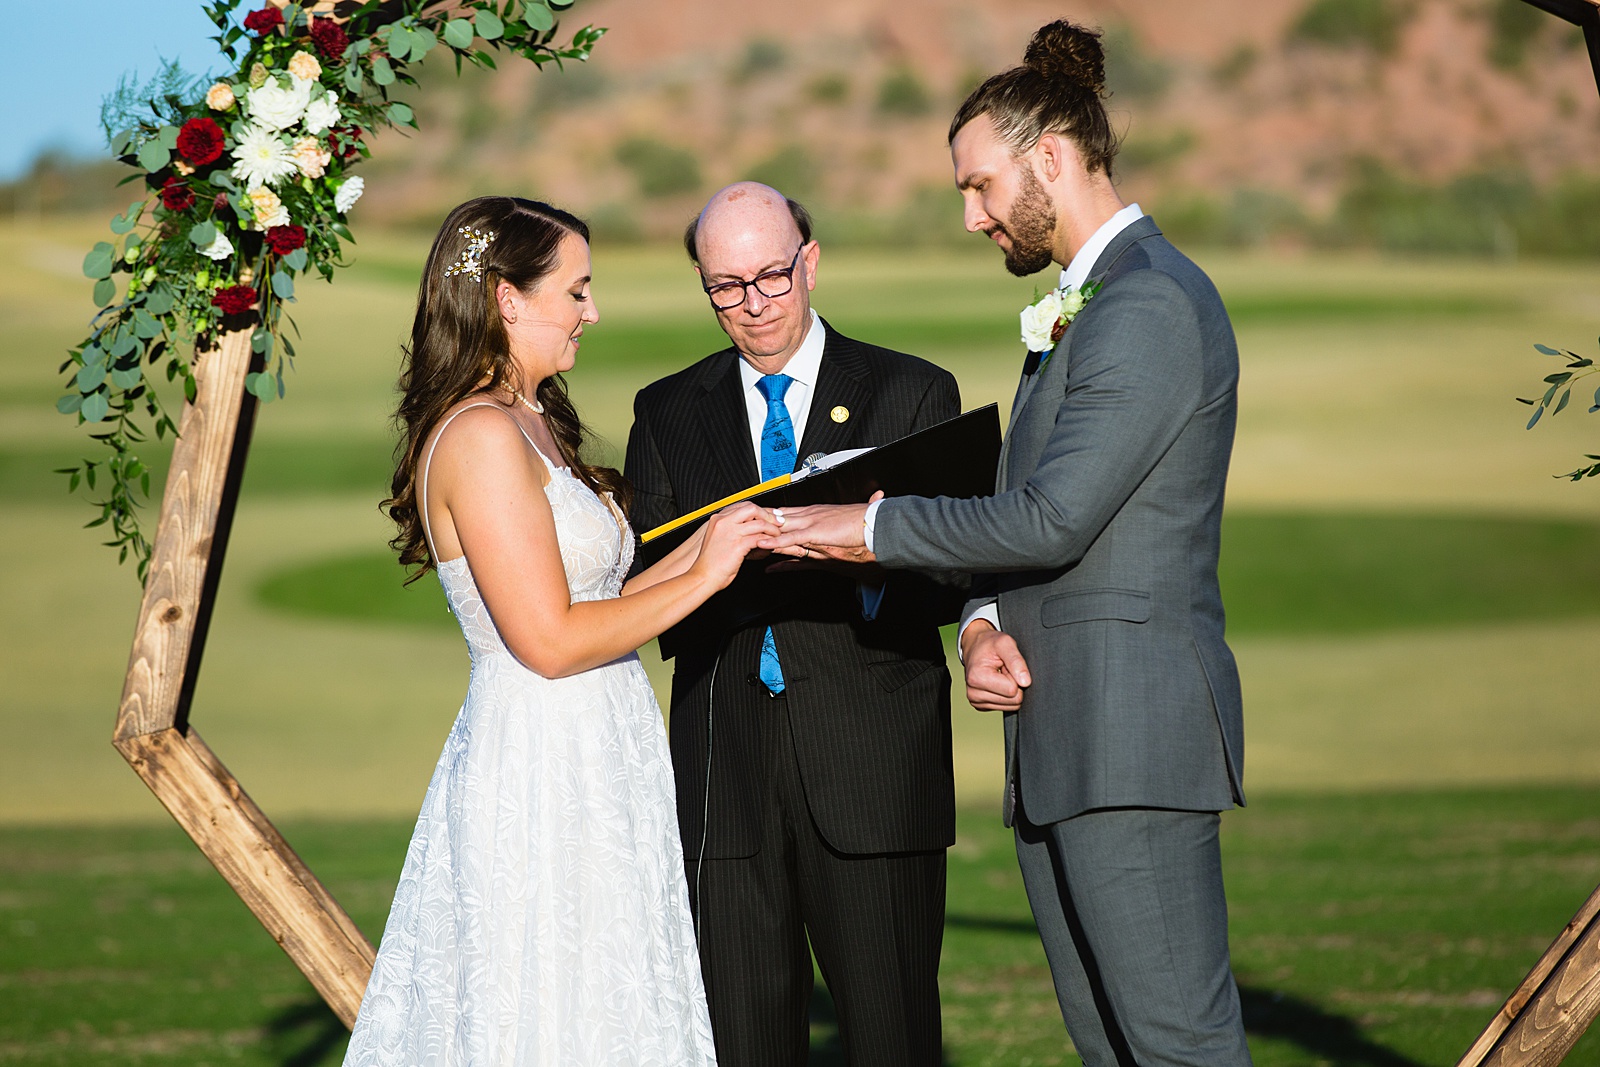 Bride and groom exchange rings during their wedding ceremony at Papago Events by Phoenix wedding photographer PMA Photography.